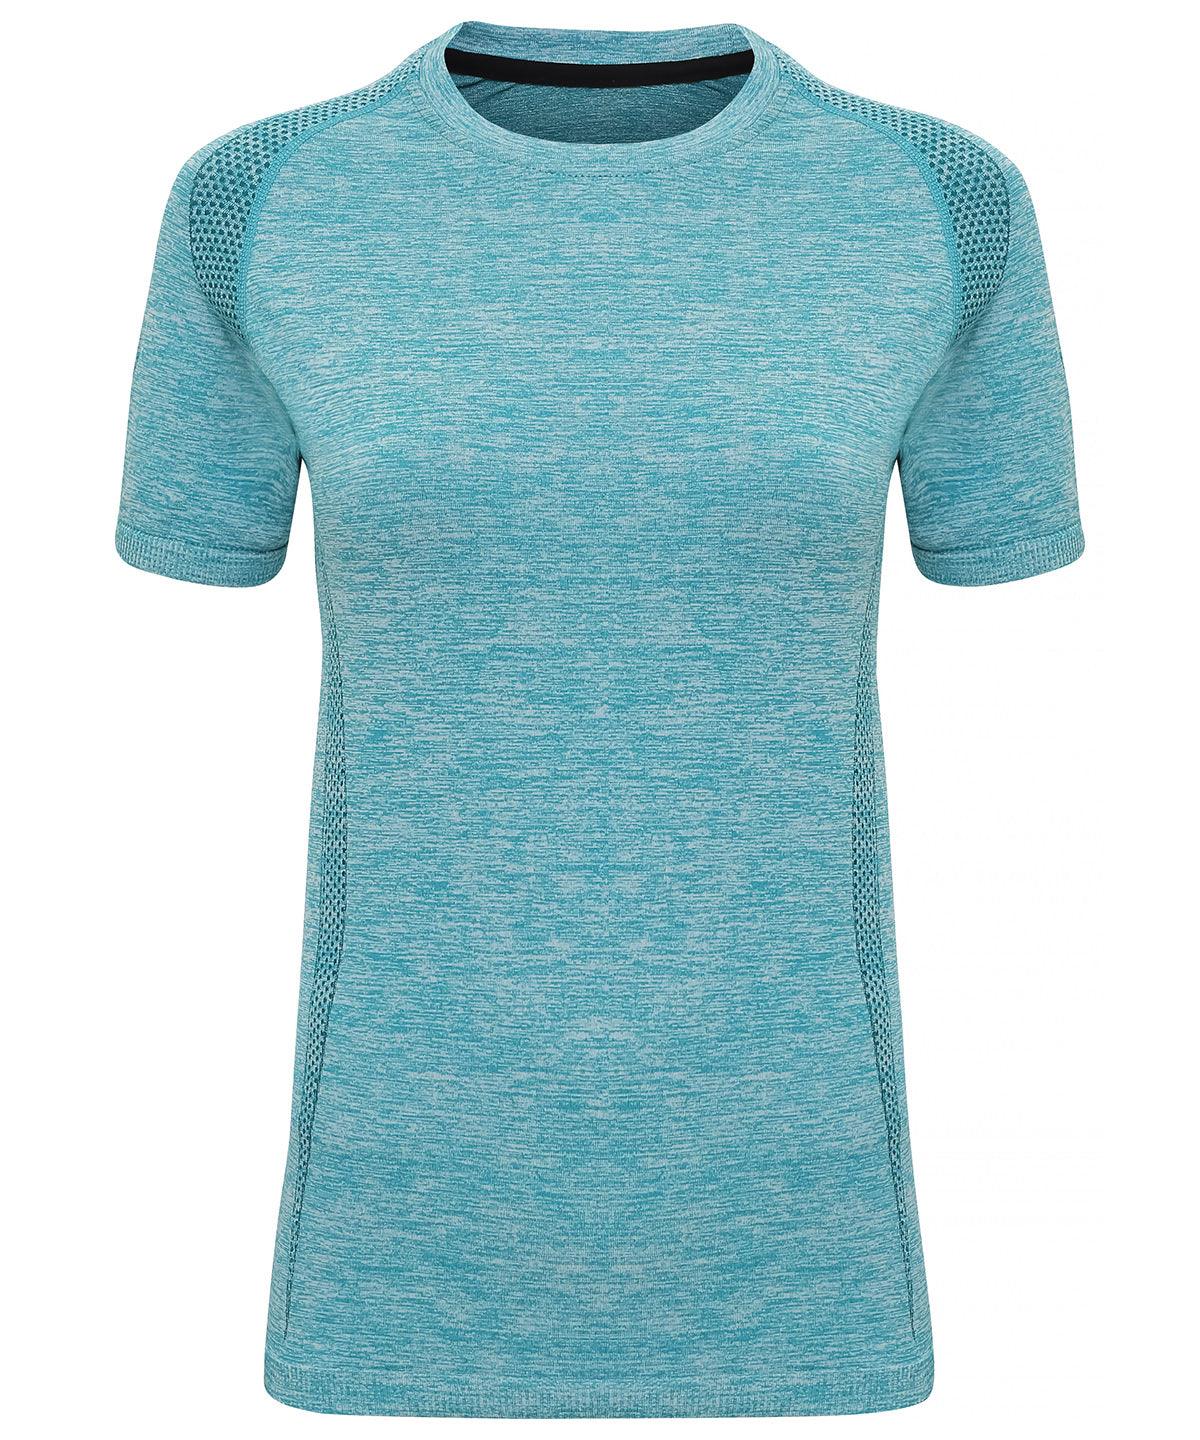 Turquoise - Women's TriDri® seamless '3D fit' multi-sport performance short sleeve top T-Shirts TriDri® Activewear & Performance, Exclusives, Sports & Leisure, T-Shirts & Vests, Women's Fashion Schoolwear Centres